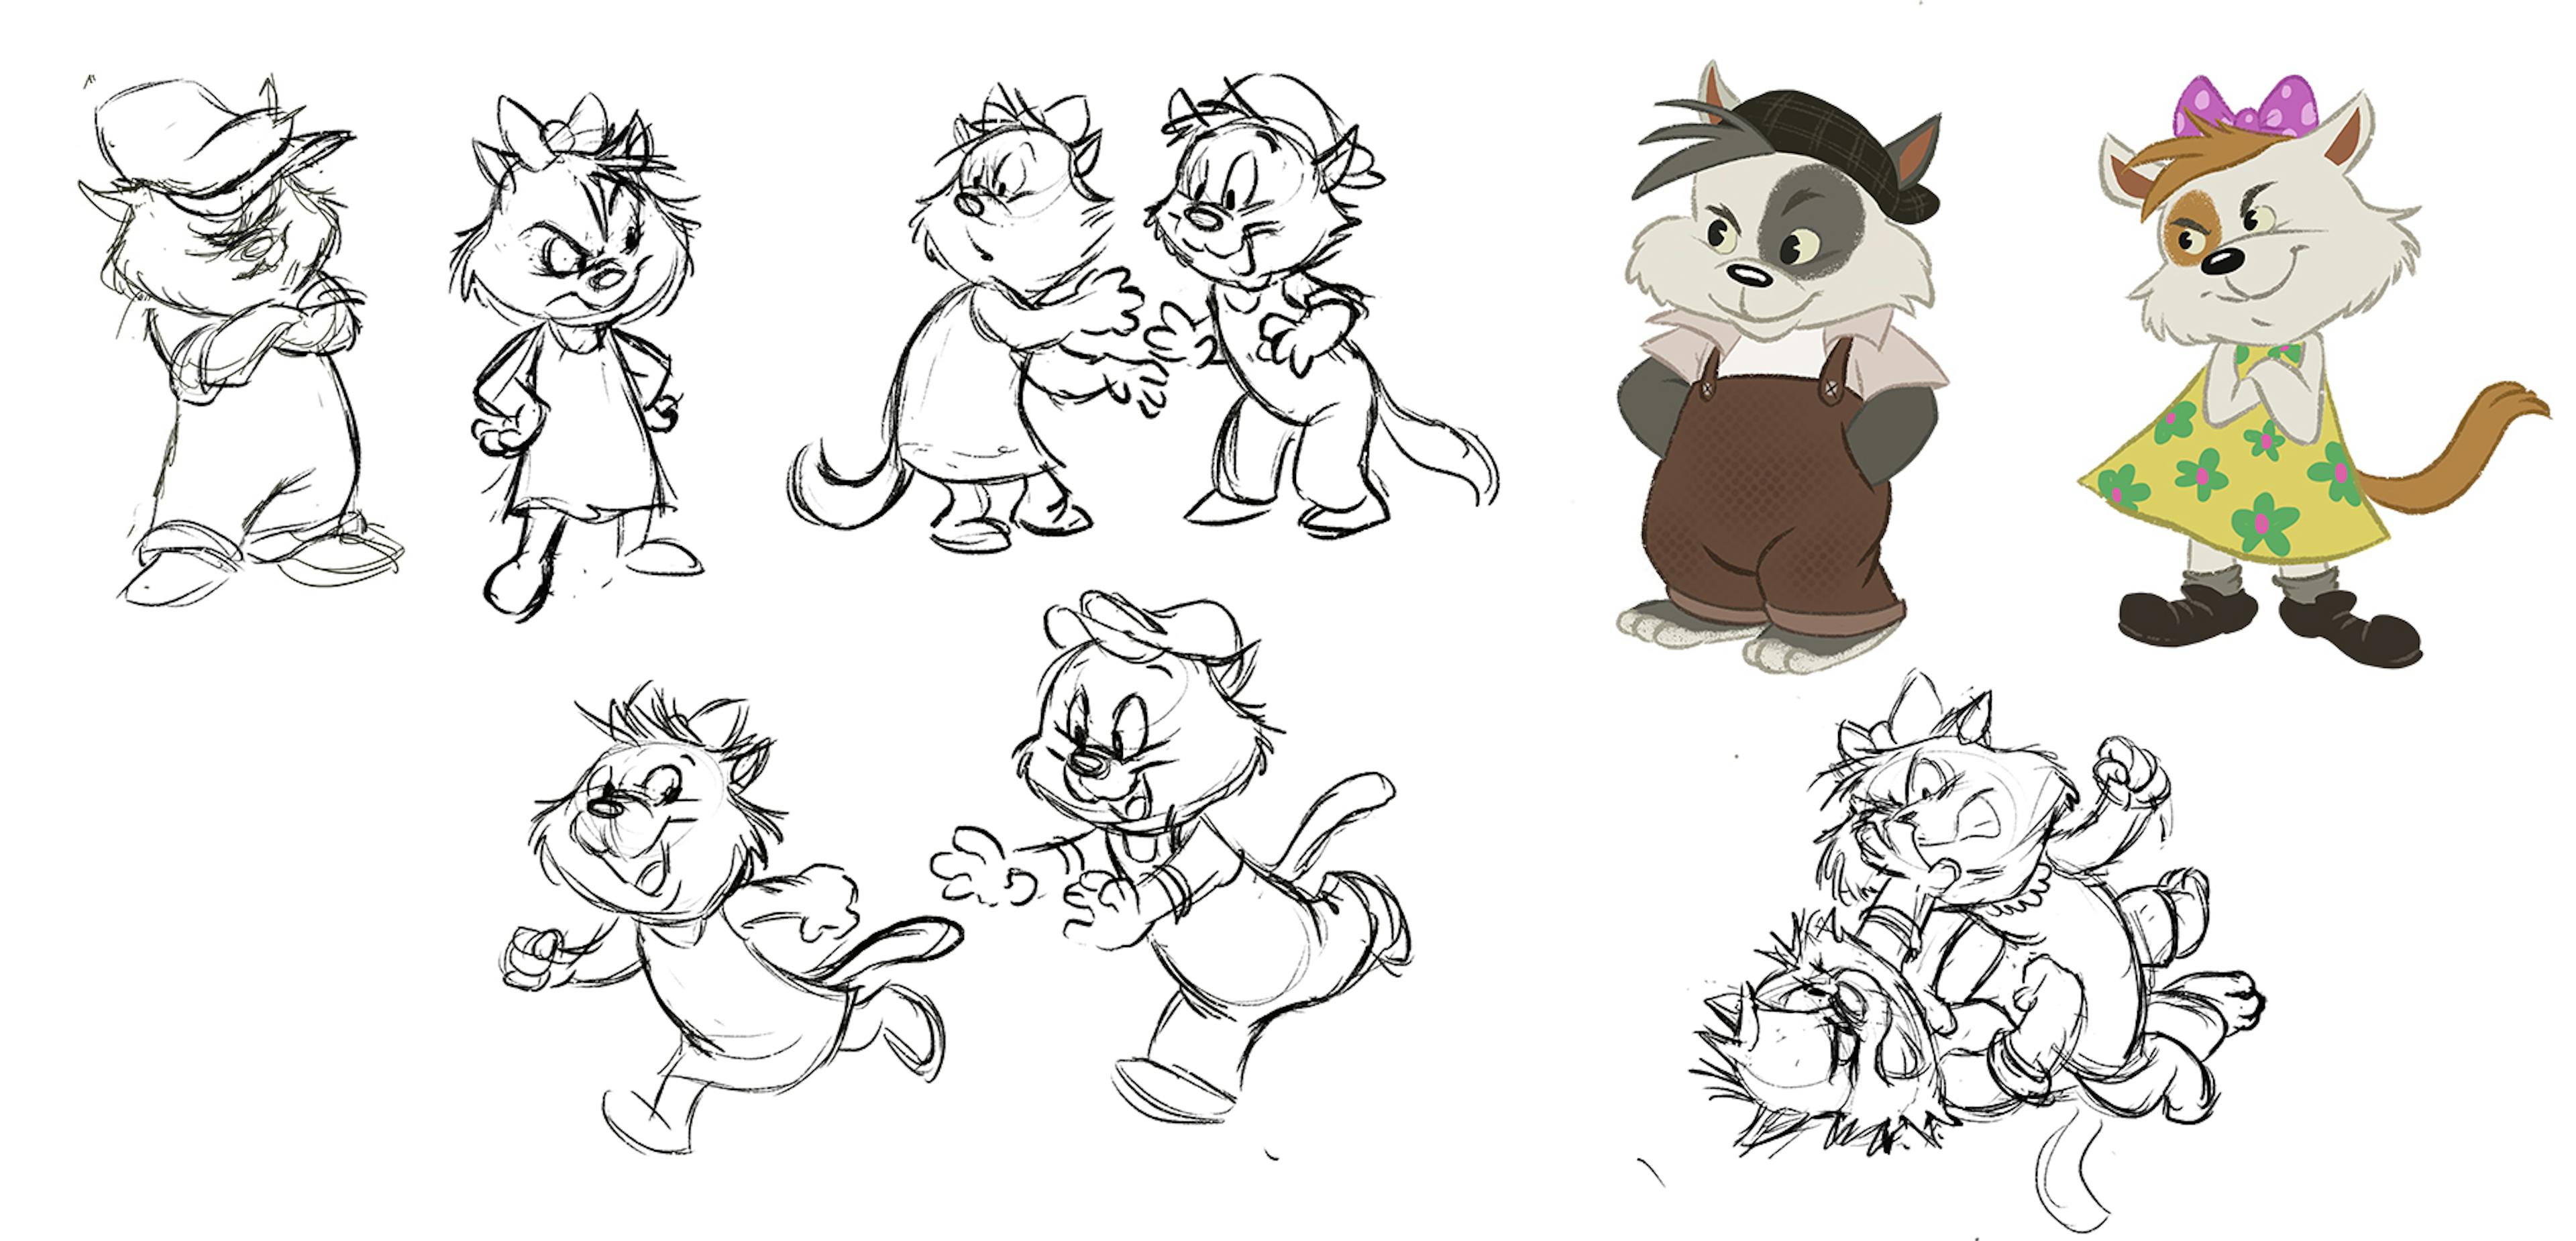 Concept sketches of a male and female cat